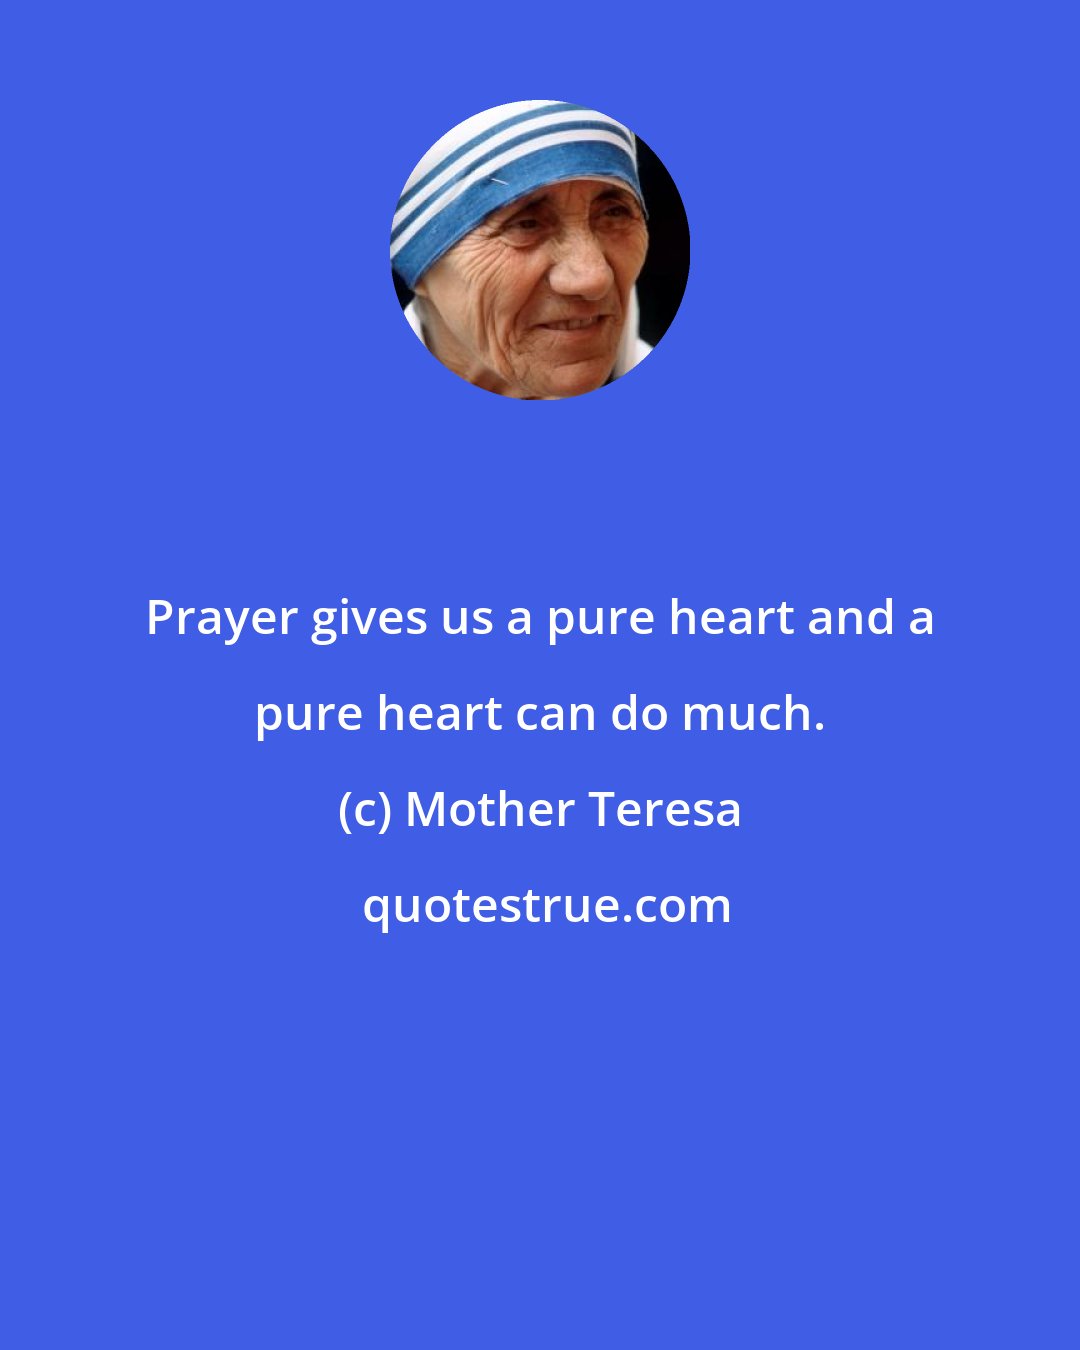 Mother Teresa: Prayer gives us a pure heart and a pure heart can do much.